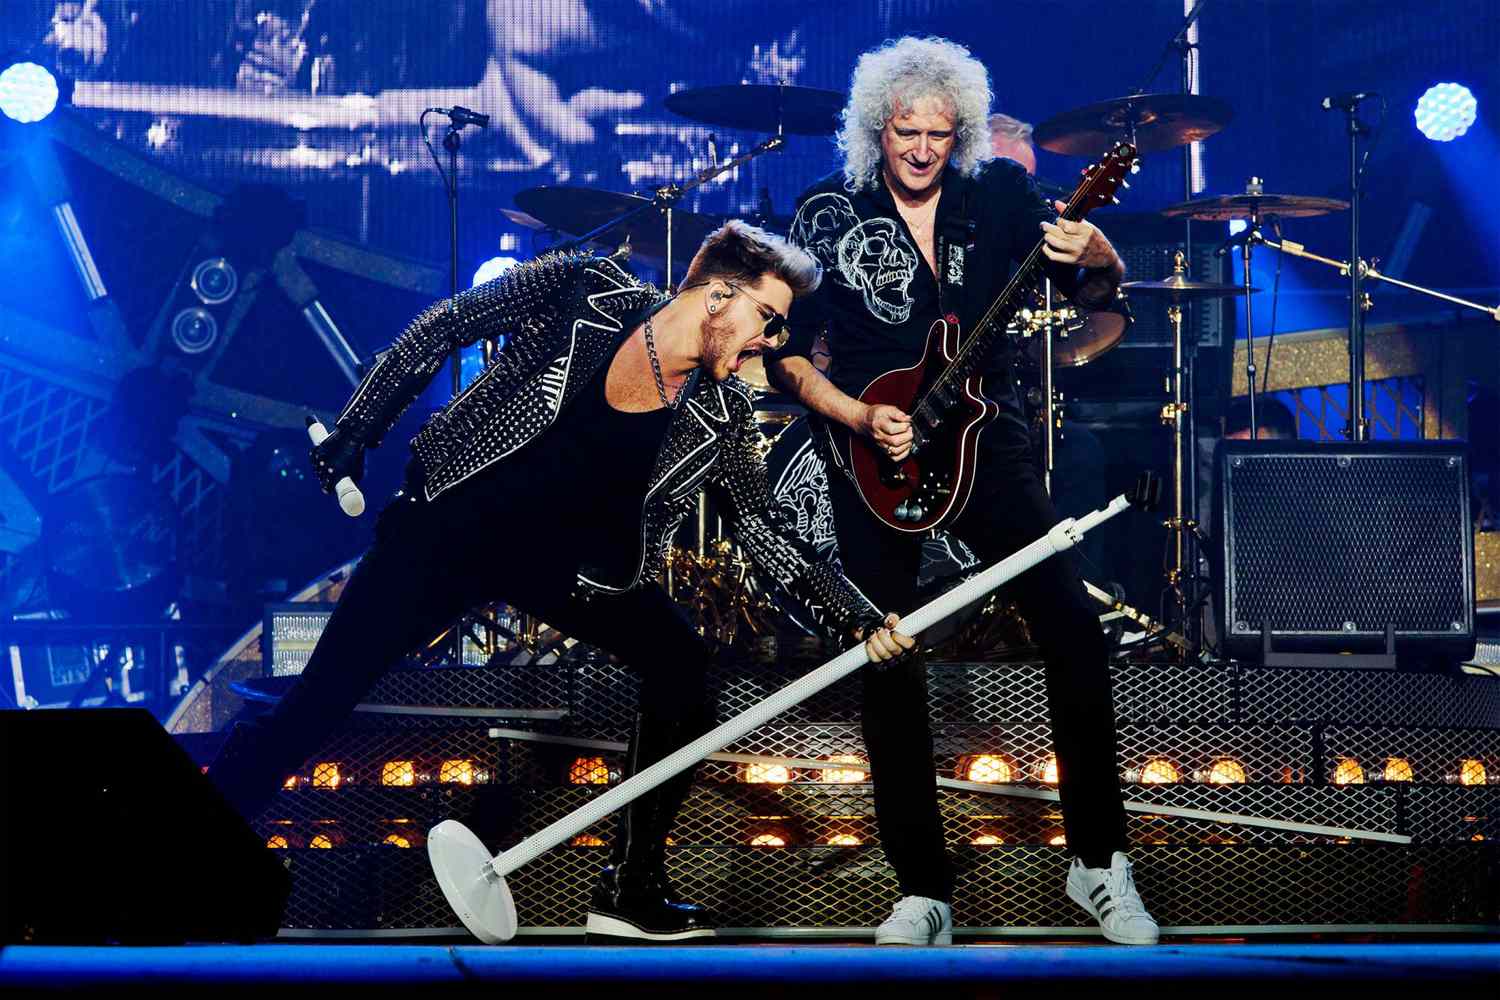 THE SHOW MUST GO ON: THE QUEEN + ADAM LAMBERT STORY - On the heels of Queen and Adam Lambert's show-stopping opening performance at the Oscars on Sunday, February 24, Lincoln Square Productions has acquired the U.S. television rights to a documentary from Miracle Productions on the iconic band and their new regular frontman, Adam Lambert. Produced by Jim Beach and acclaimed writer and filmmaker Simon Lupton, "The Show Must Go On: The Queen + Adam Lambert Story" airs MONDAY, APRIL 29 (8:00 - 10:00 p.m. ET) on the ABC Television Network, prior to Queen and Lambert's already sold-out July/August 2019 U.S. "Rhapsody" tour. (Miracle Productions) ADAM LAMBERT, QUEEN